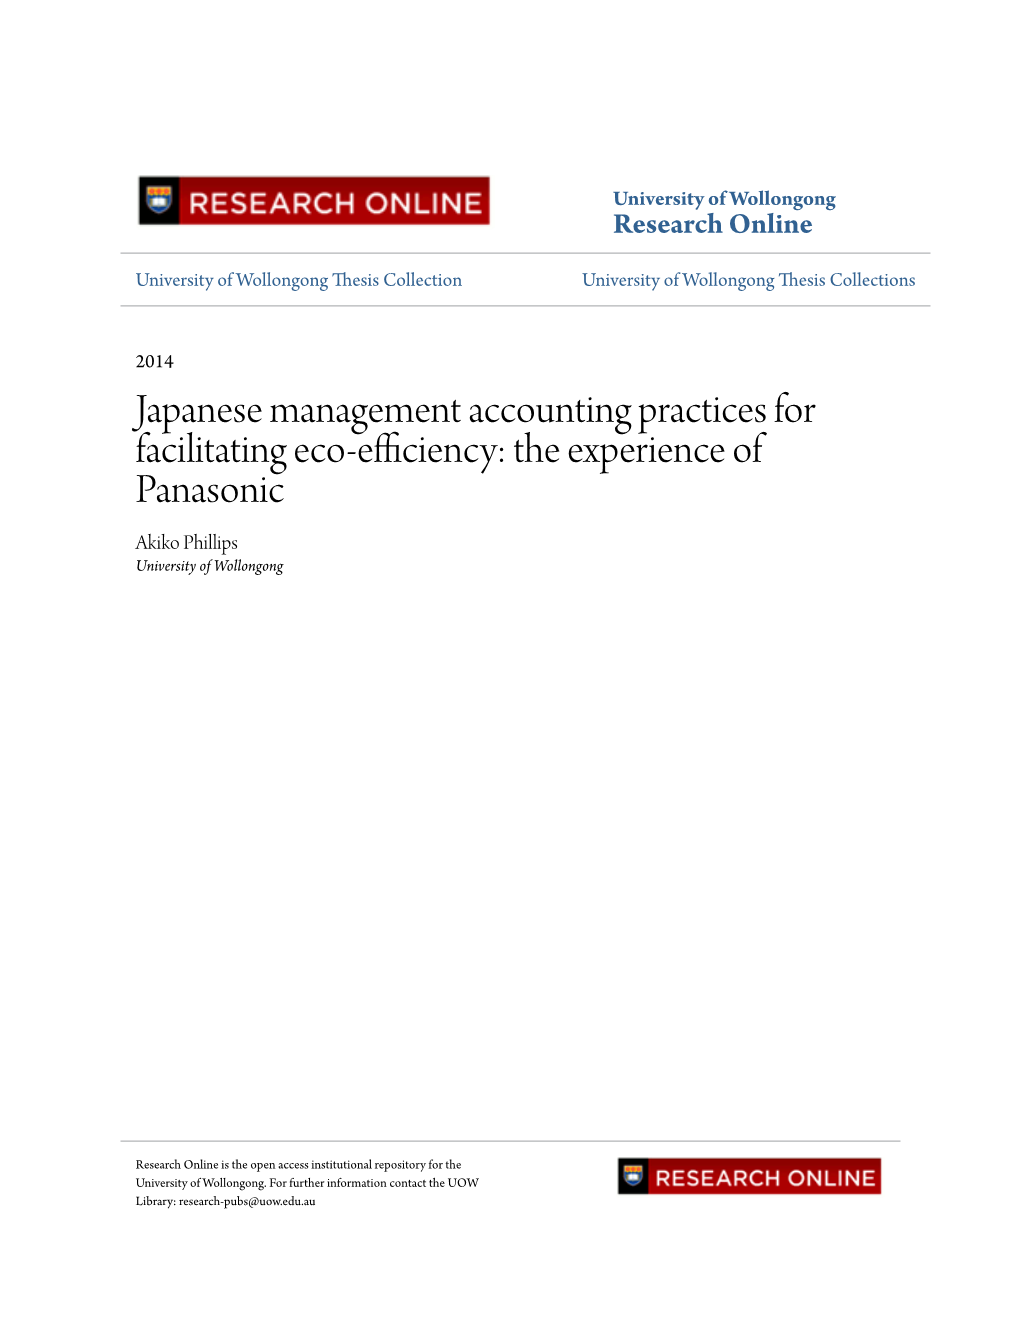 Japanese Management Accounting Practices for Facilitating Eco-Efficiency: the Experience of Panasonic Akiko Phillips University of Wollongong